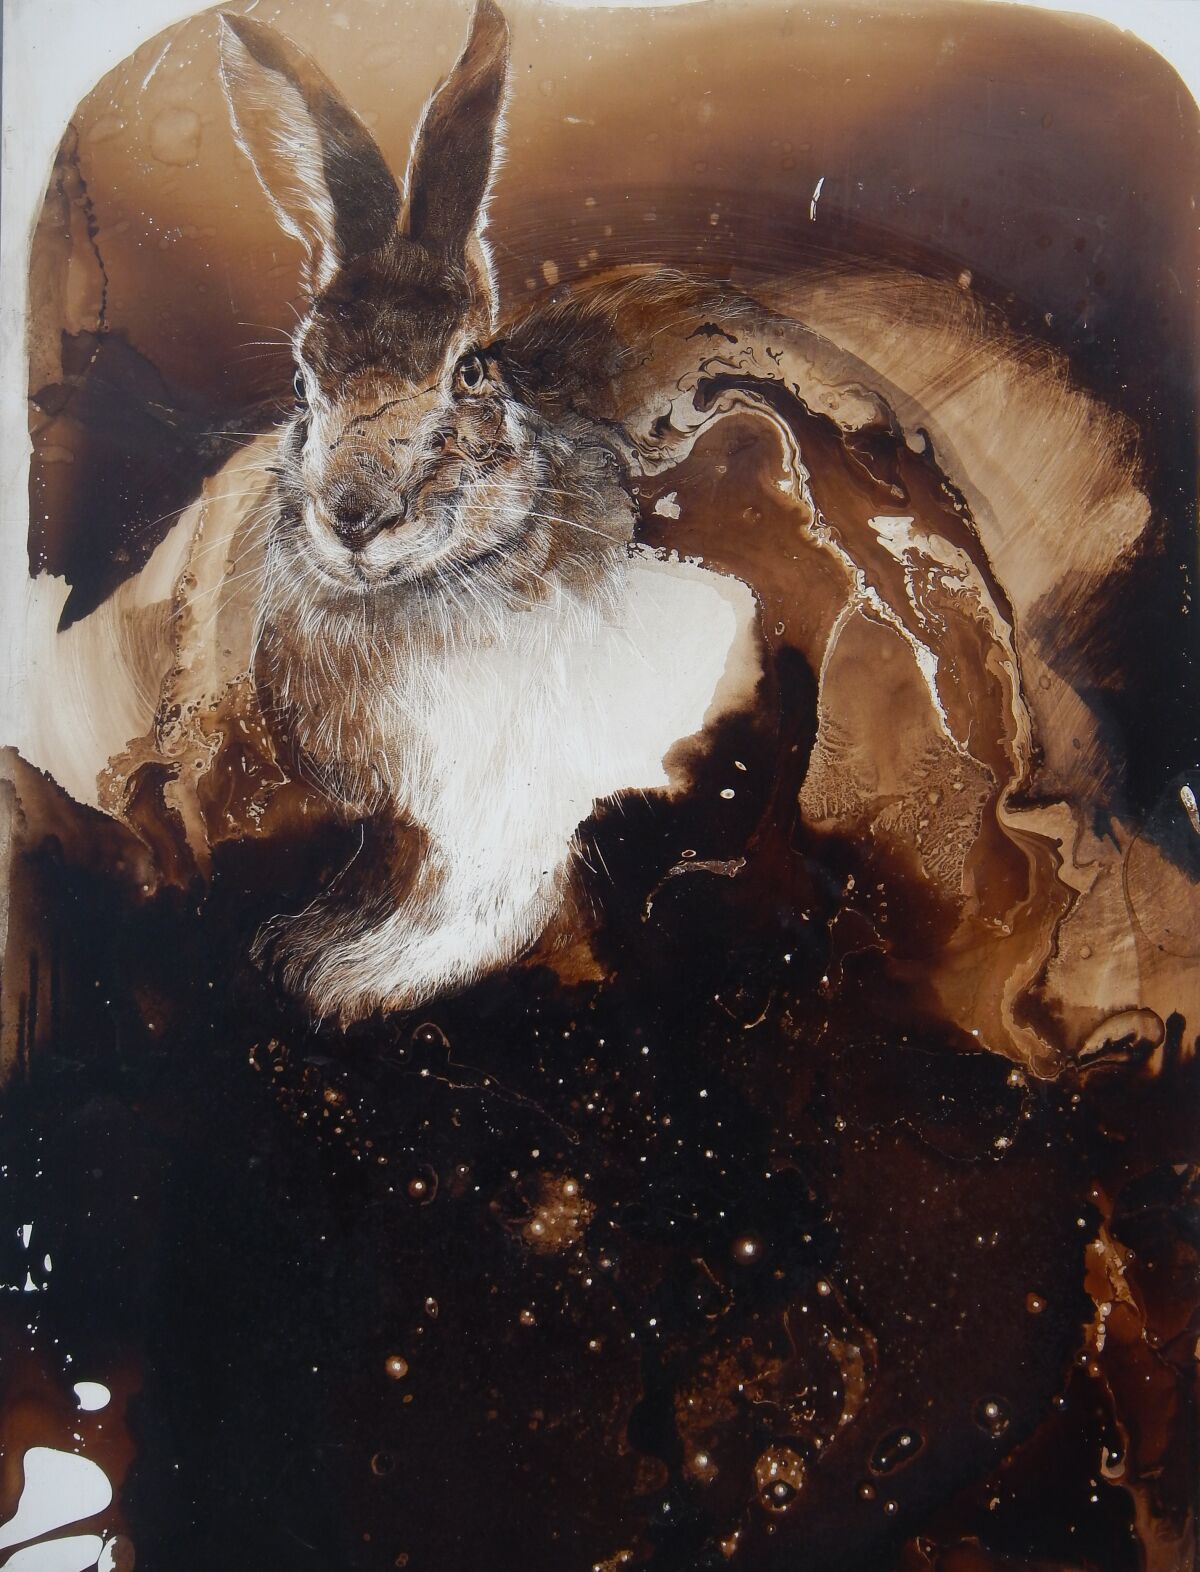 "Rabbit in Star Light" by James Griffith, 2019. Tar on panel, 24 inches by 18 inches